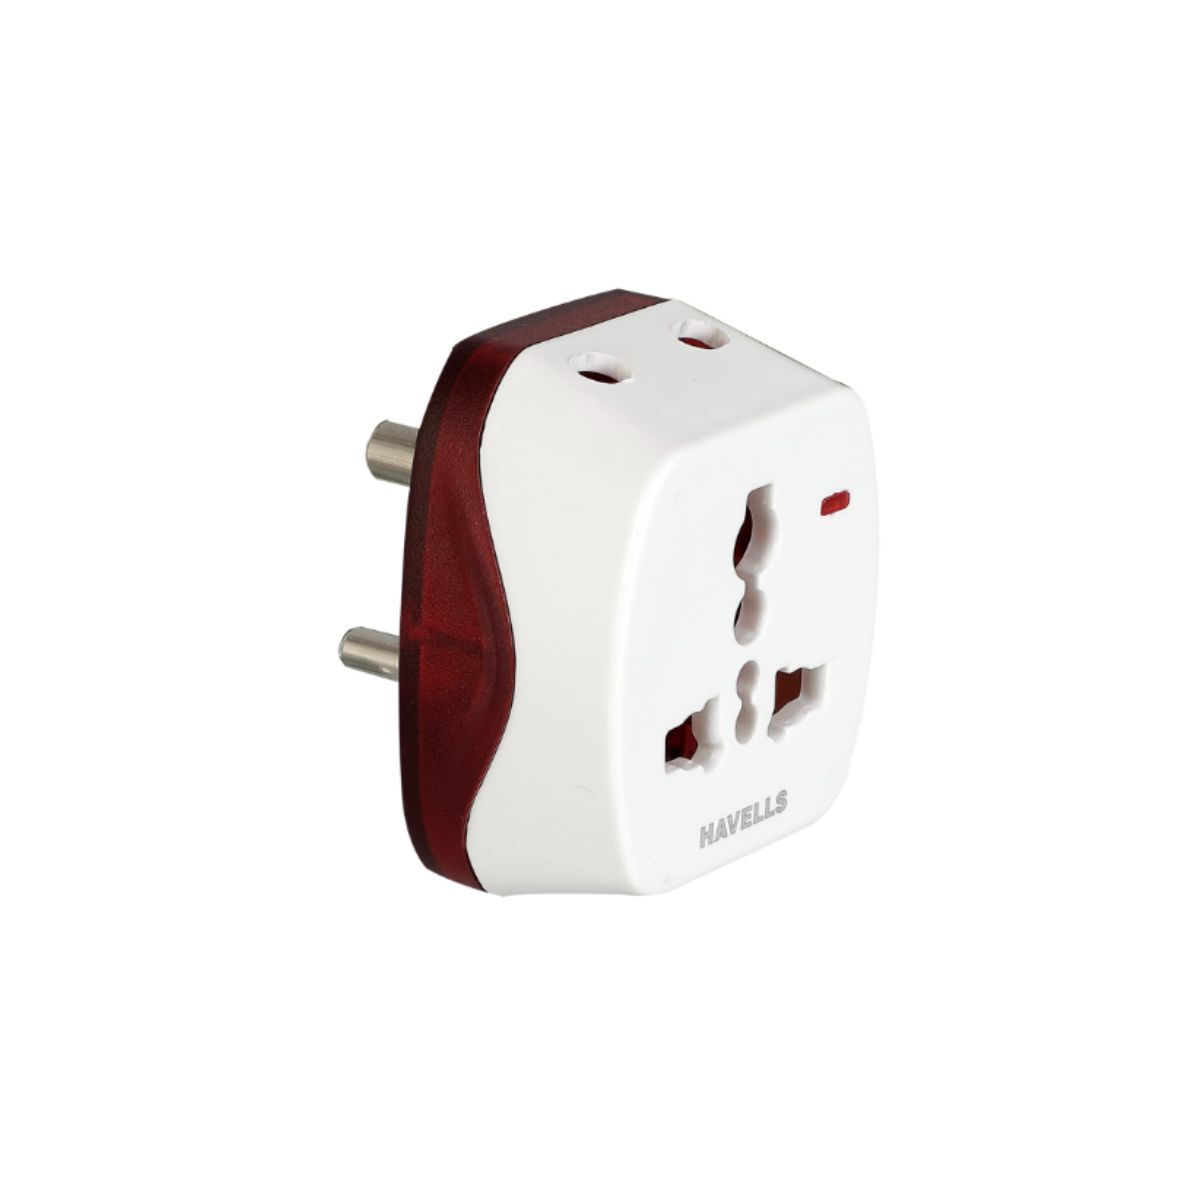 HAVELLS 6 A 3 PIN UNIVERSAL ADAPTOR WITH INDICATOR